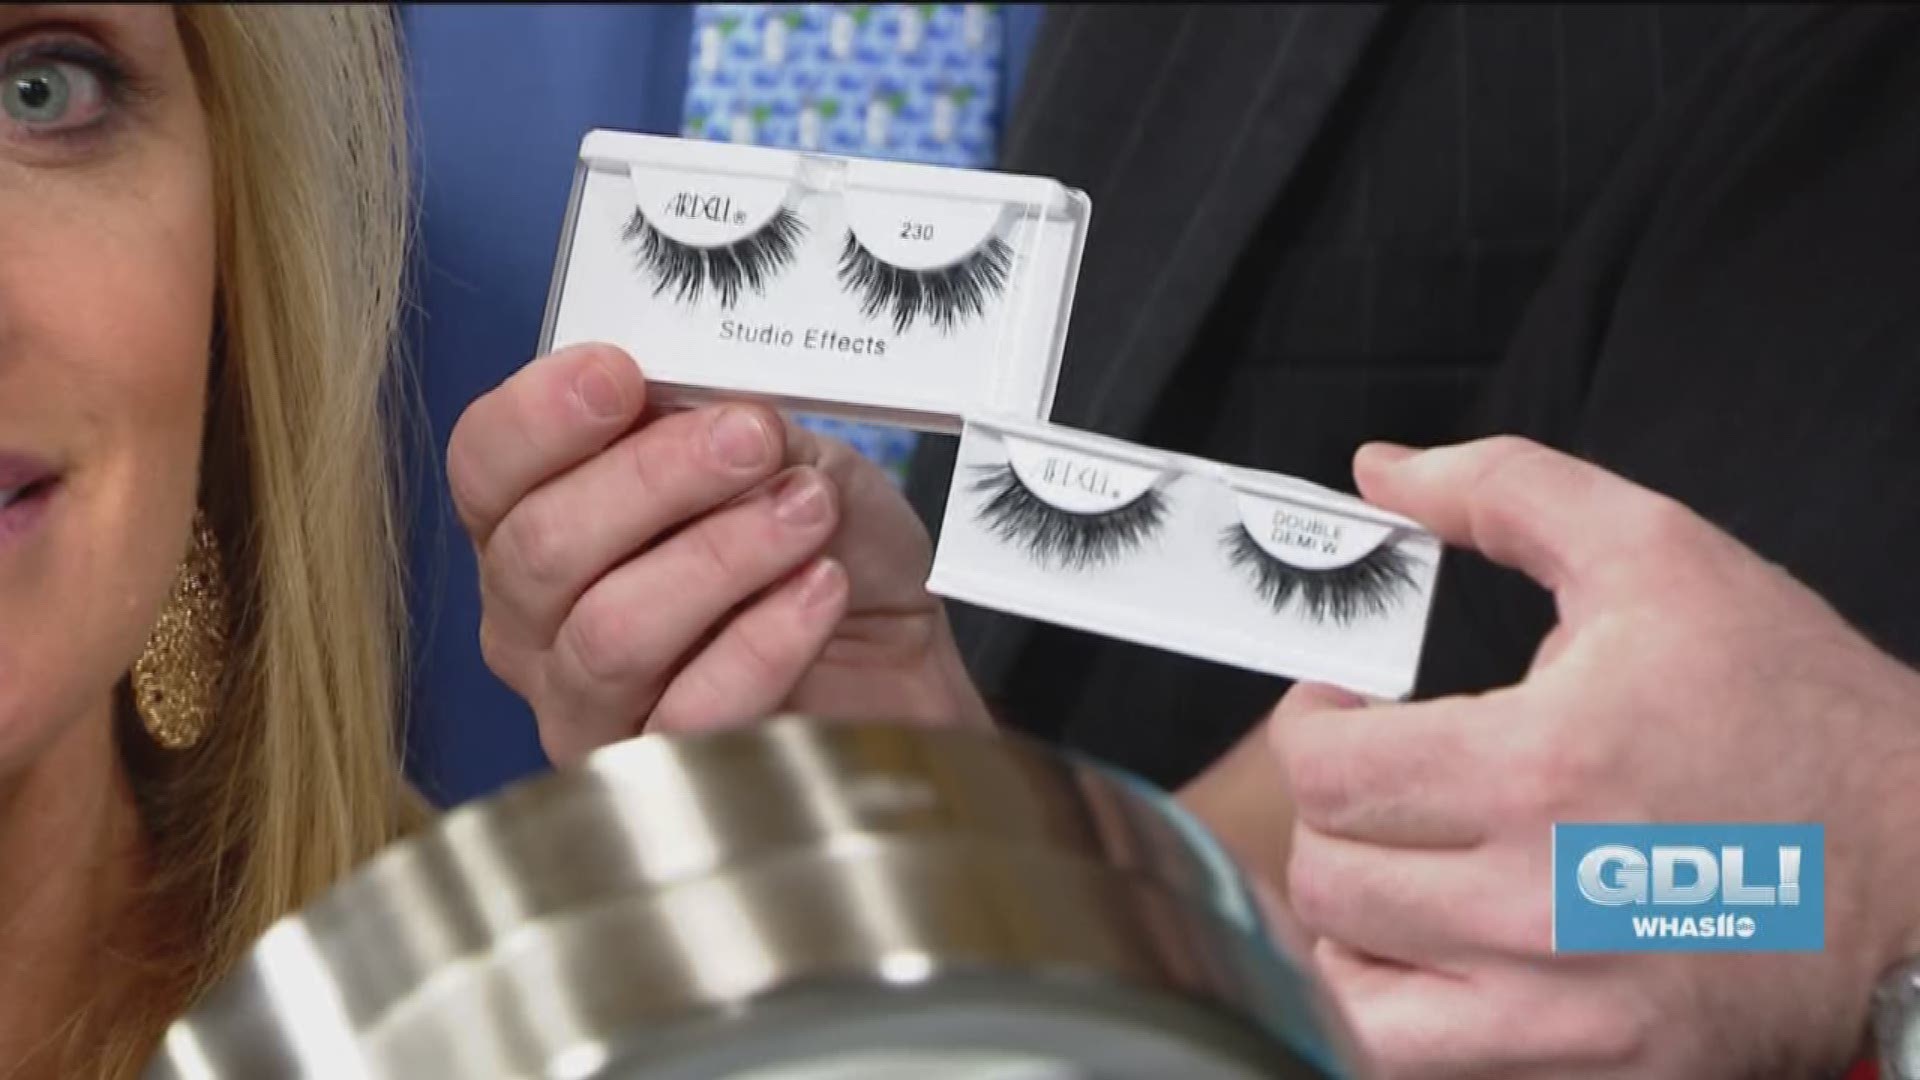 Makeup artist Rick Bancroft stopped by Great Day Live to share some secrets for wearing false eyelashes.